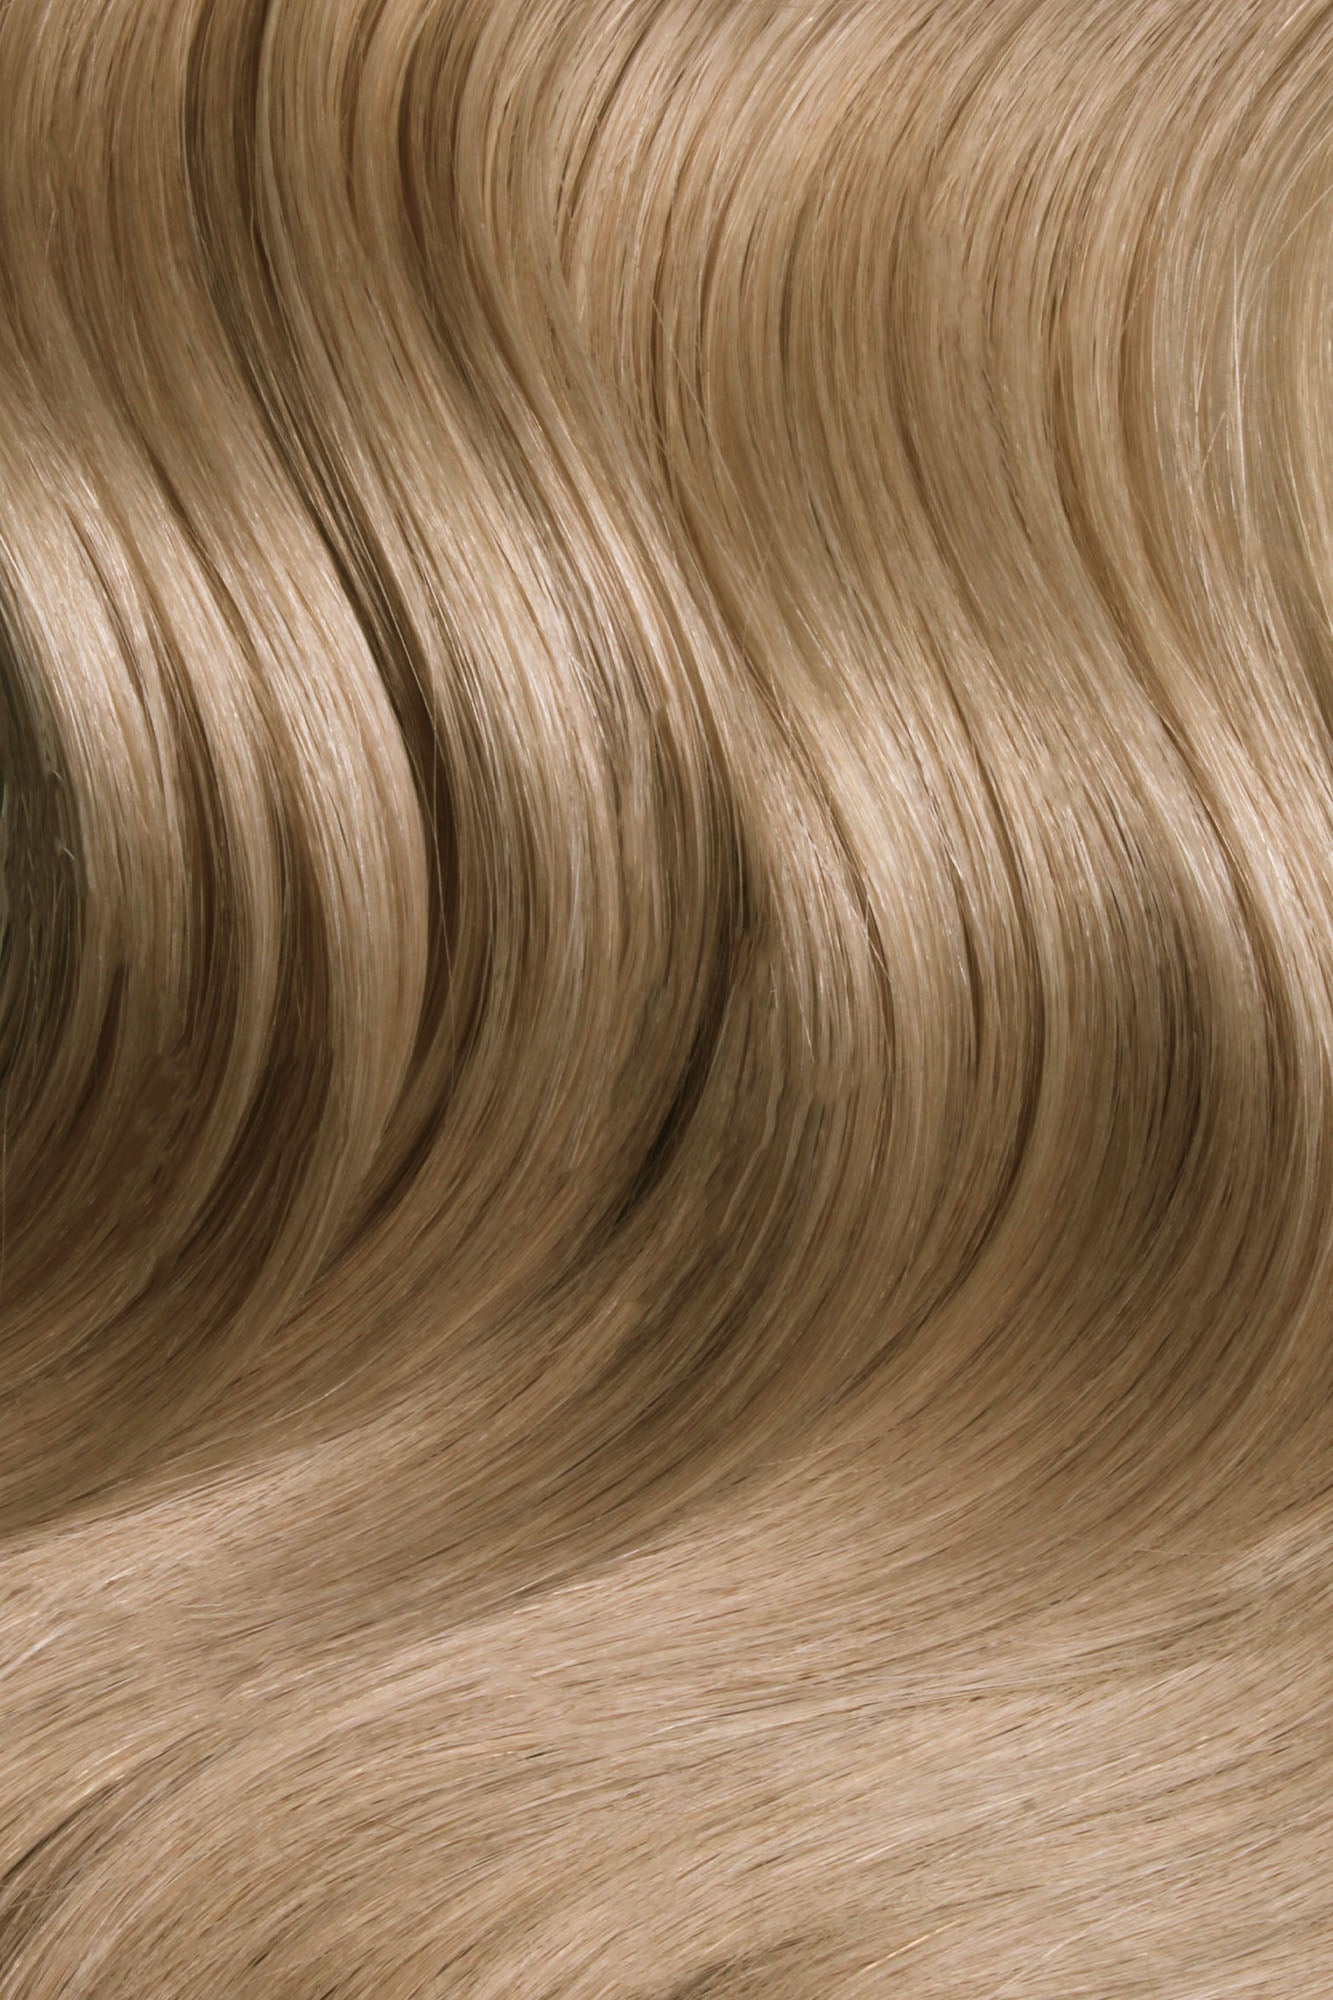 Nano Bonds 22 Inches - SWAY Hair Extensions Ash-Blondette-7-20 Ultra-fine, invisible bonds for a flawless, natural look. 100% Remy Human hair, lightweight and versatile. Reusable and perfect for individual or salon use.